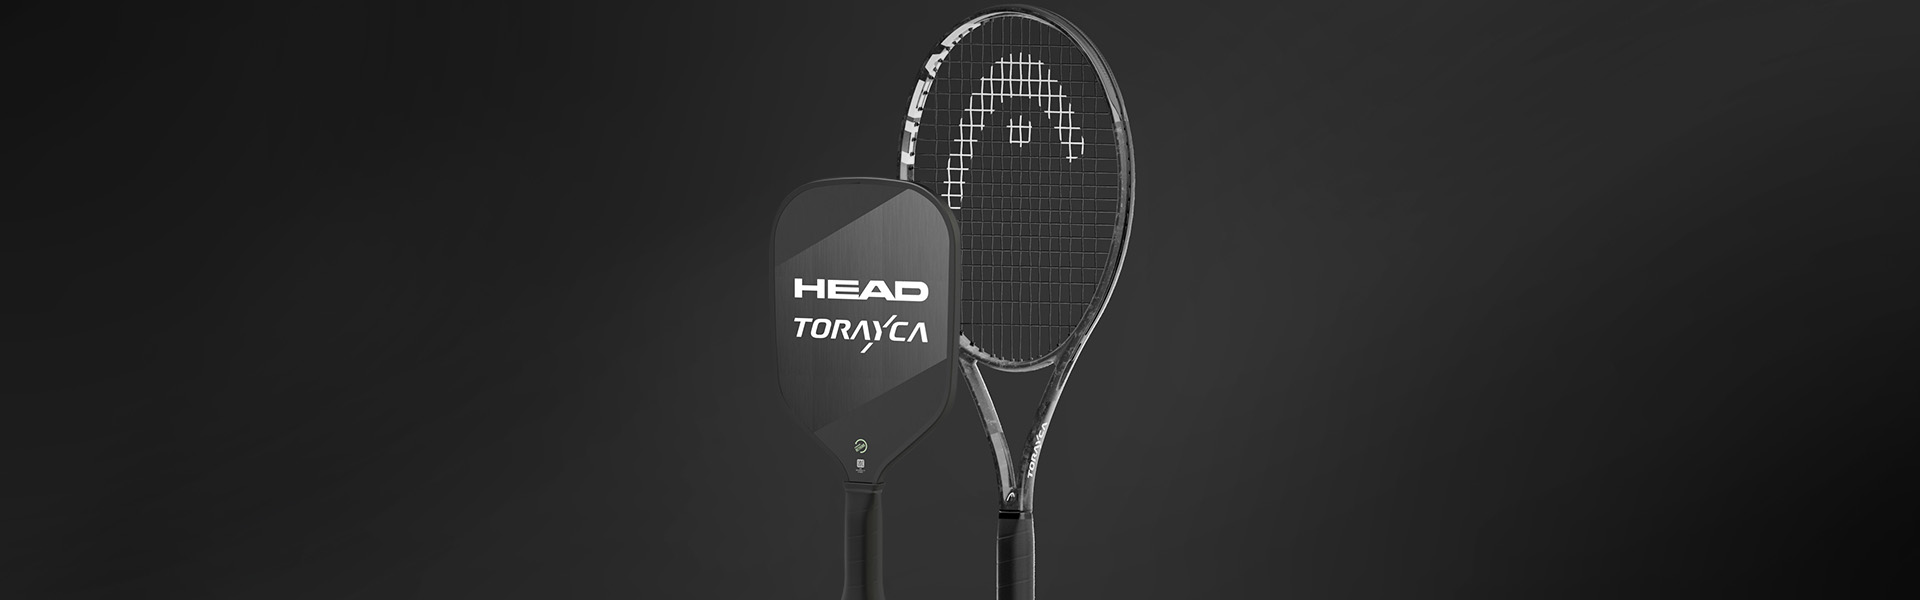 HEAD is working on more sustainable tennis racquets and pickleball paddles 